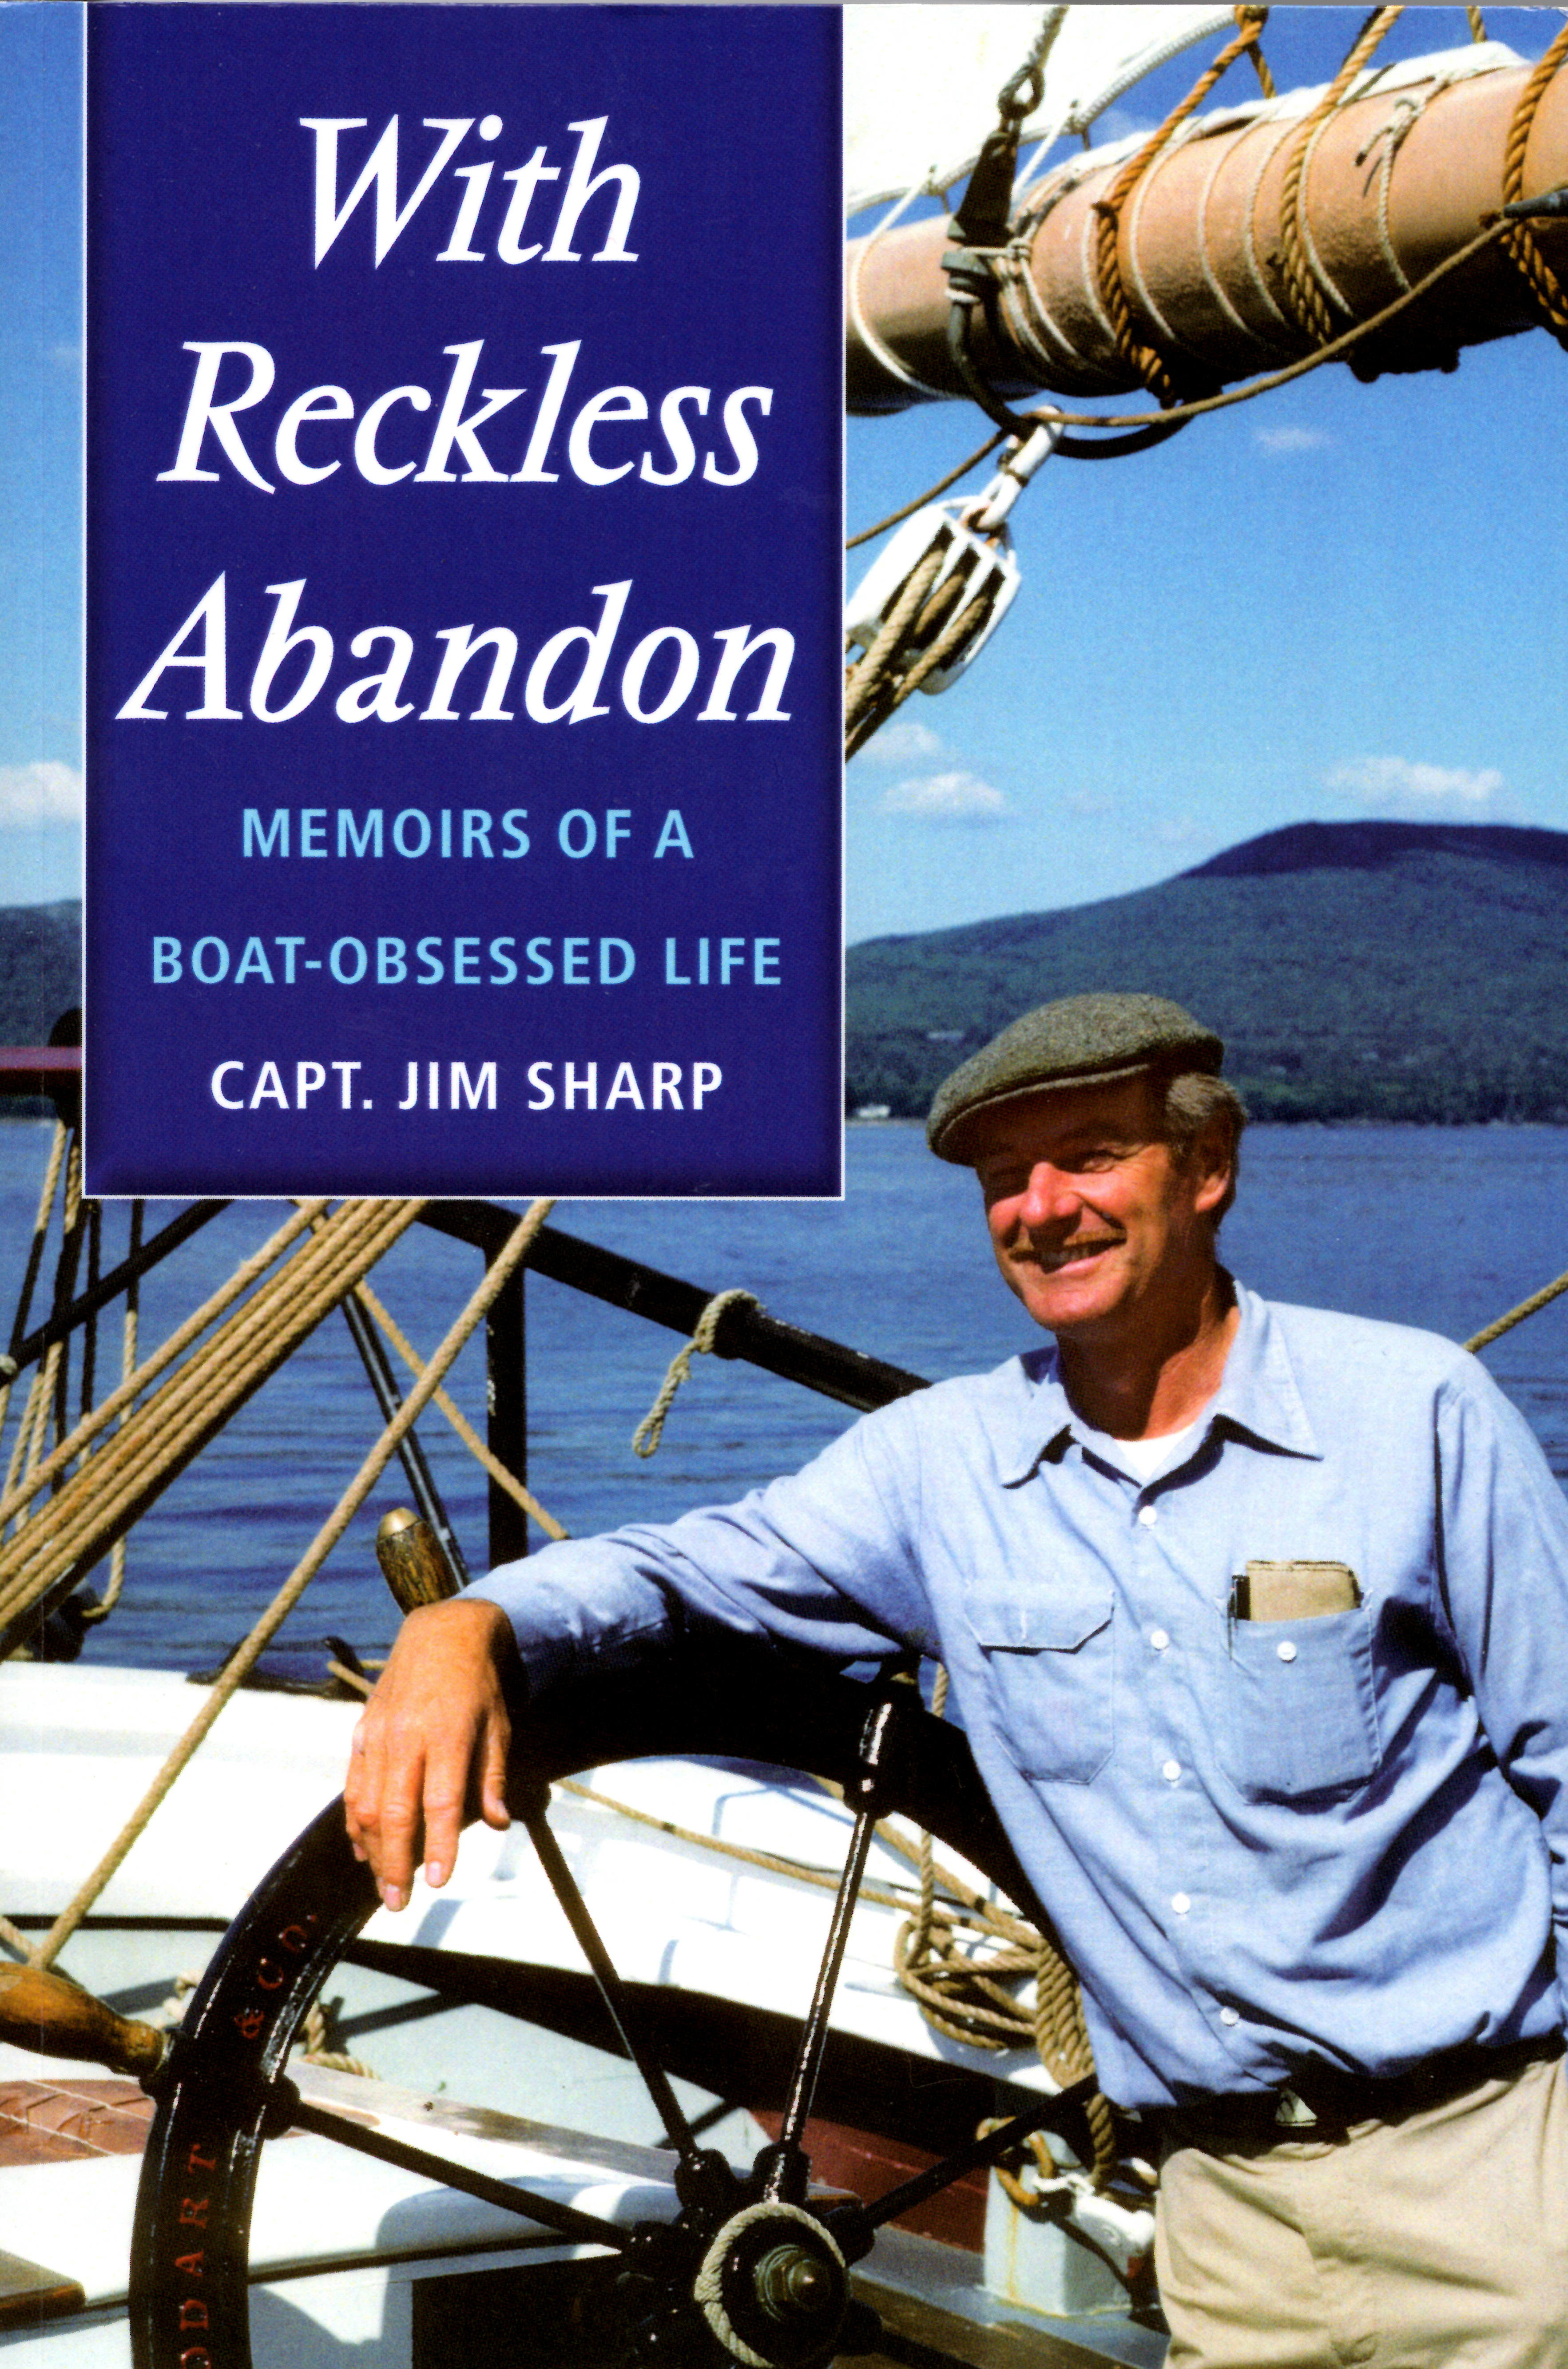 Let's Talk About Seafaring...'With Reckless Abandon'